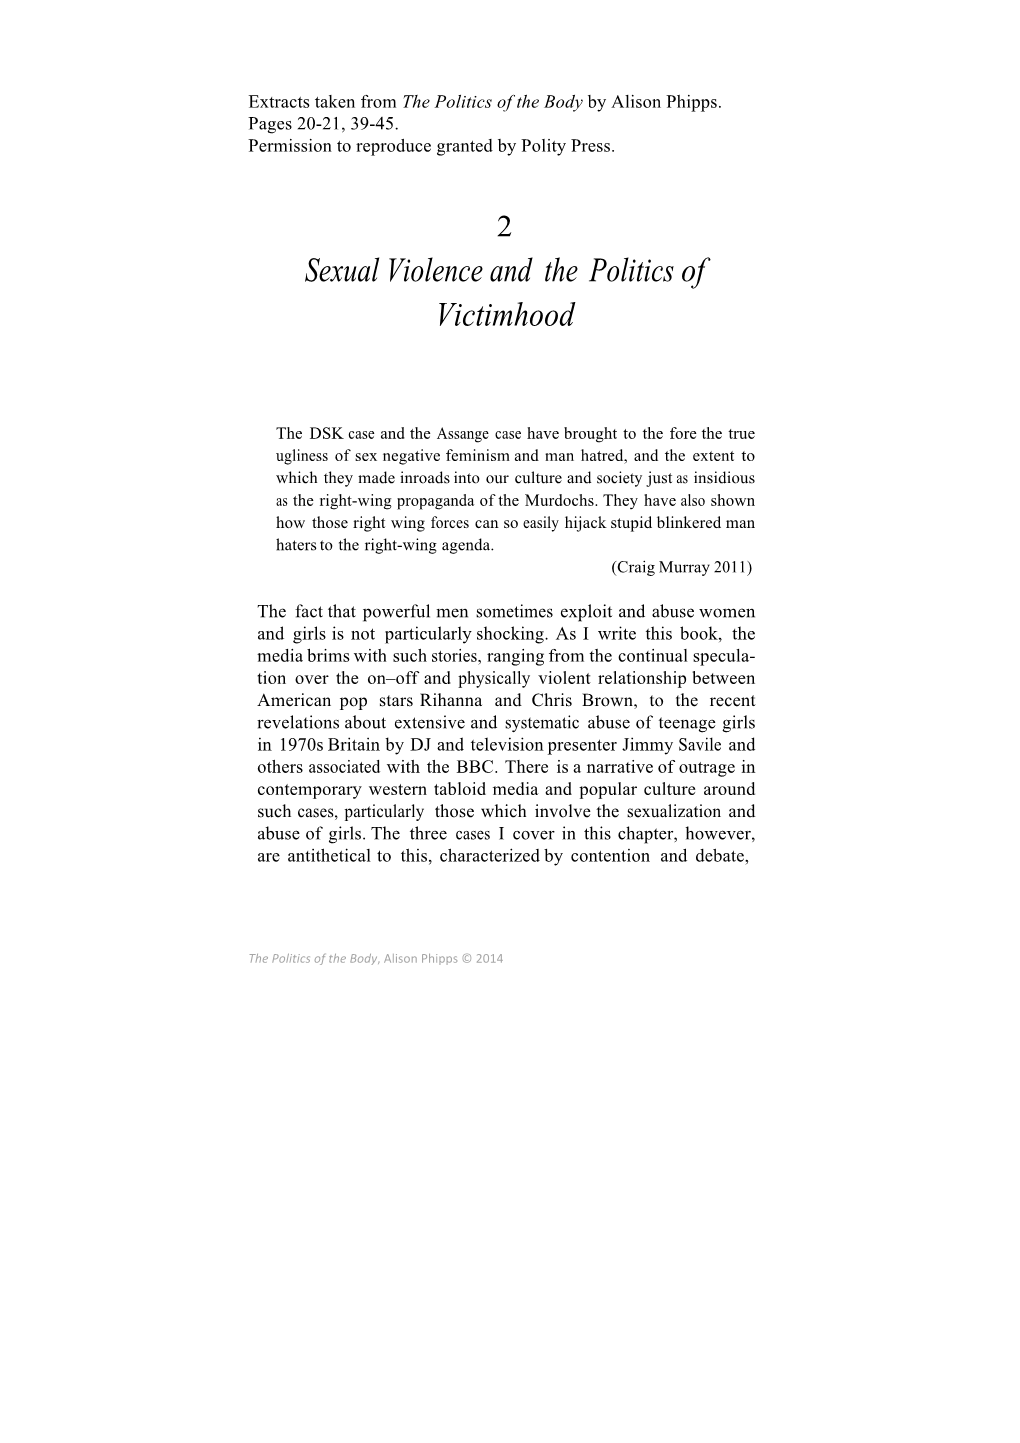 Sexual Violence and the Politics of Victimhood